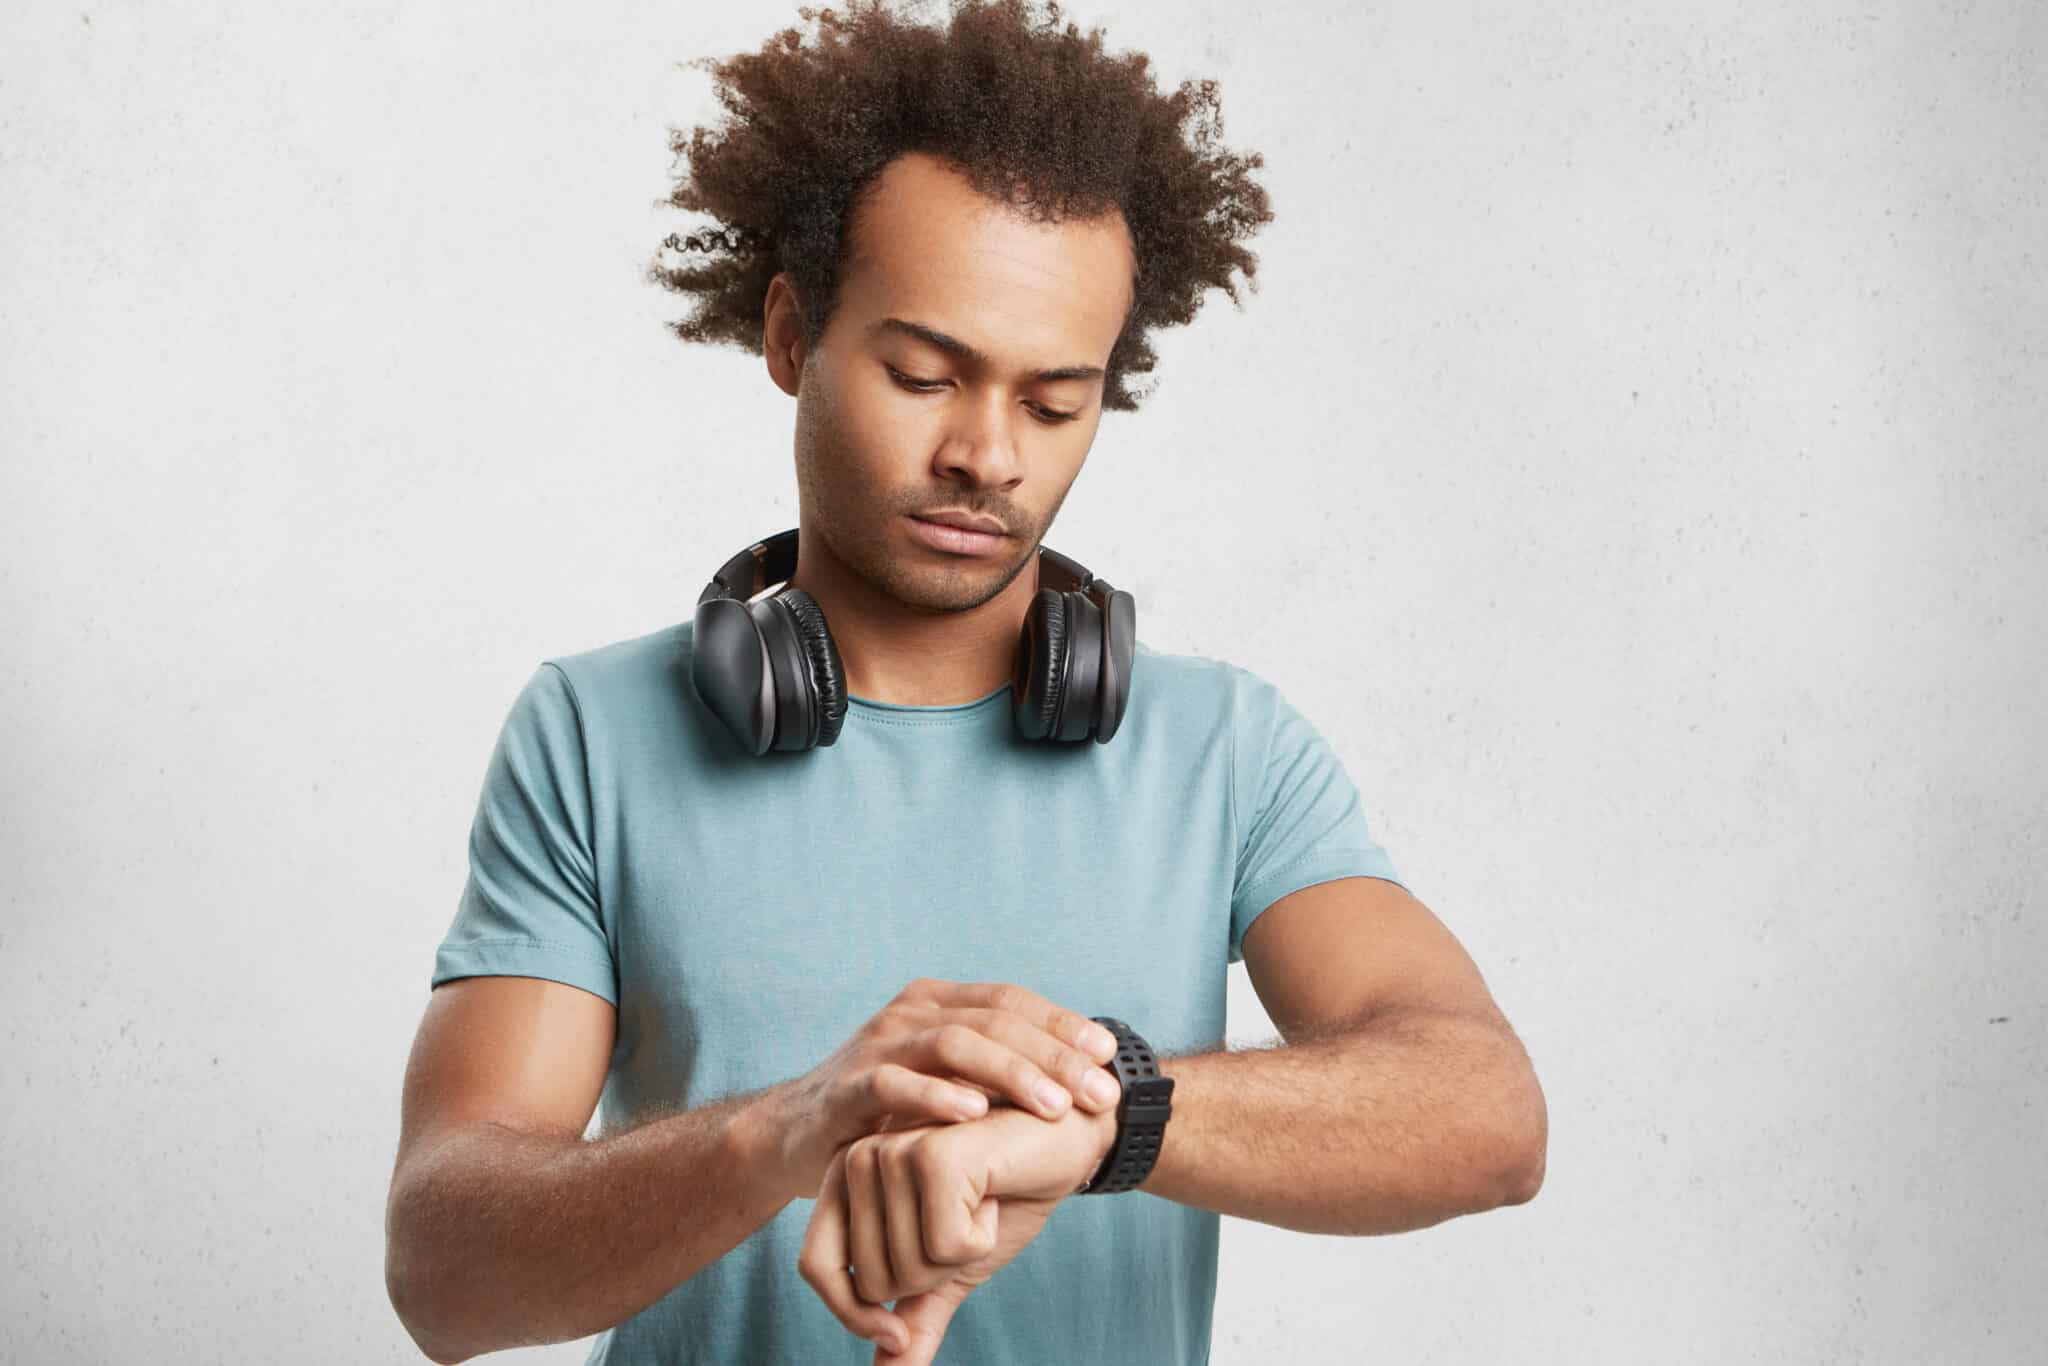 A young man with frizzy hair and headphones around his neck looks at his watch, symbolizing the wait associated with the expiry of the naturalization period. He wears a turquoise T-shirt and stands in front of a neutral white background.